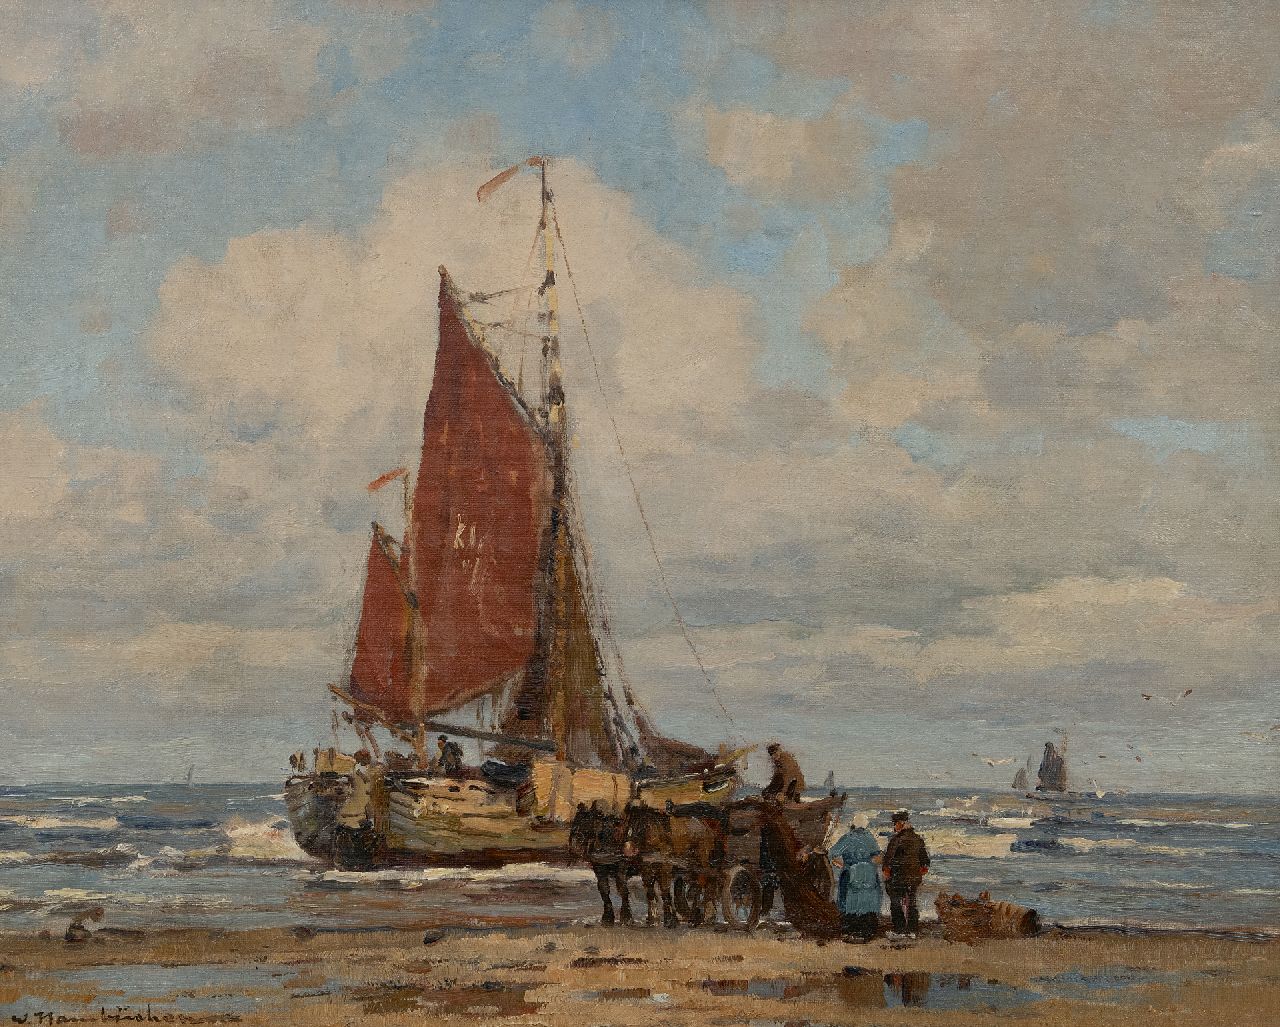 Hambüchen W.  | Wilhelm Hambüchen | Paintings offered for sale | Fishing vessel in the surf, Katwijk, oil on canvas 50.0 x 60.5 cm, signed l.l.